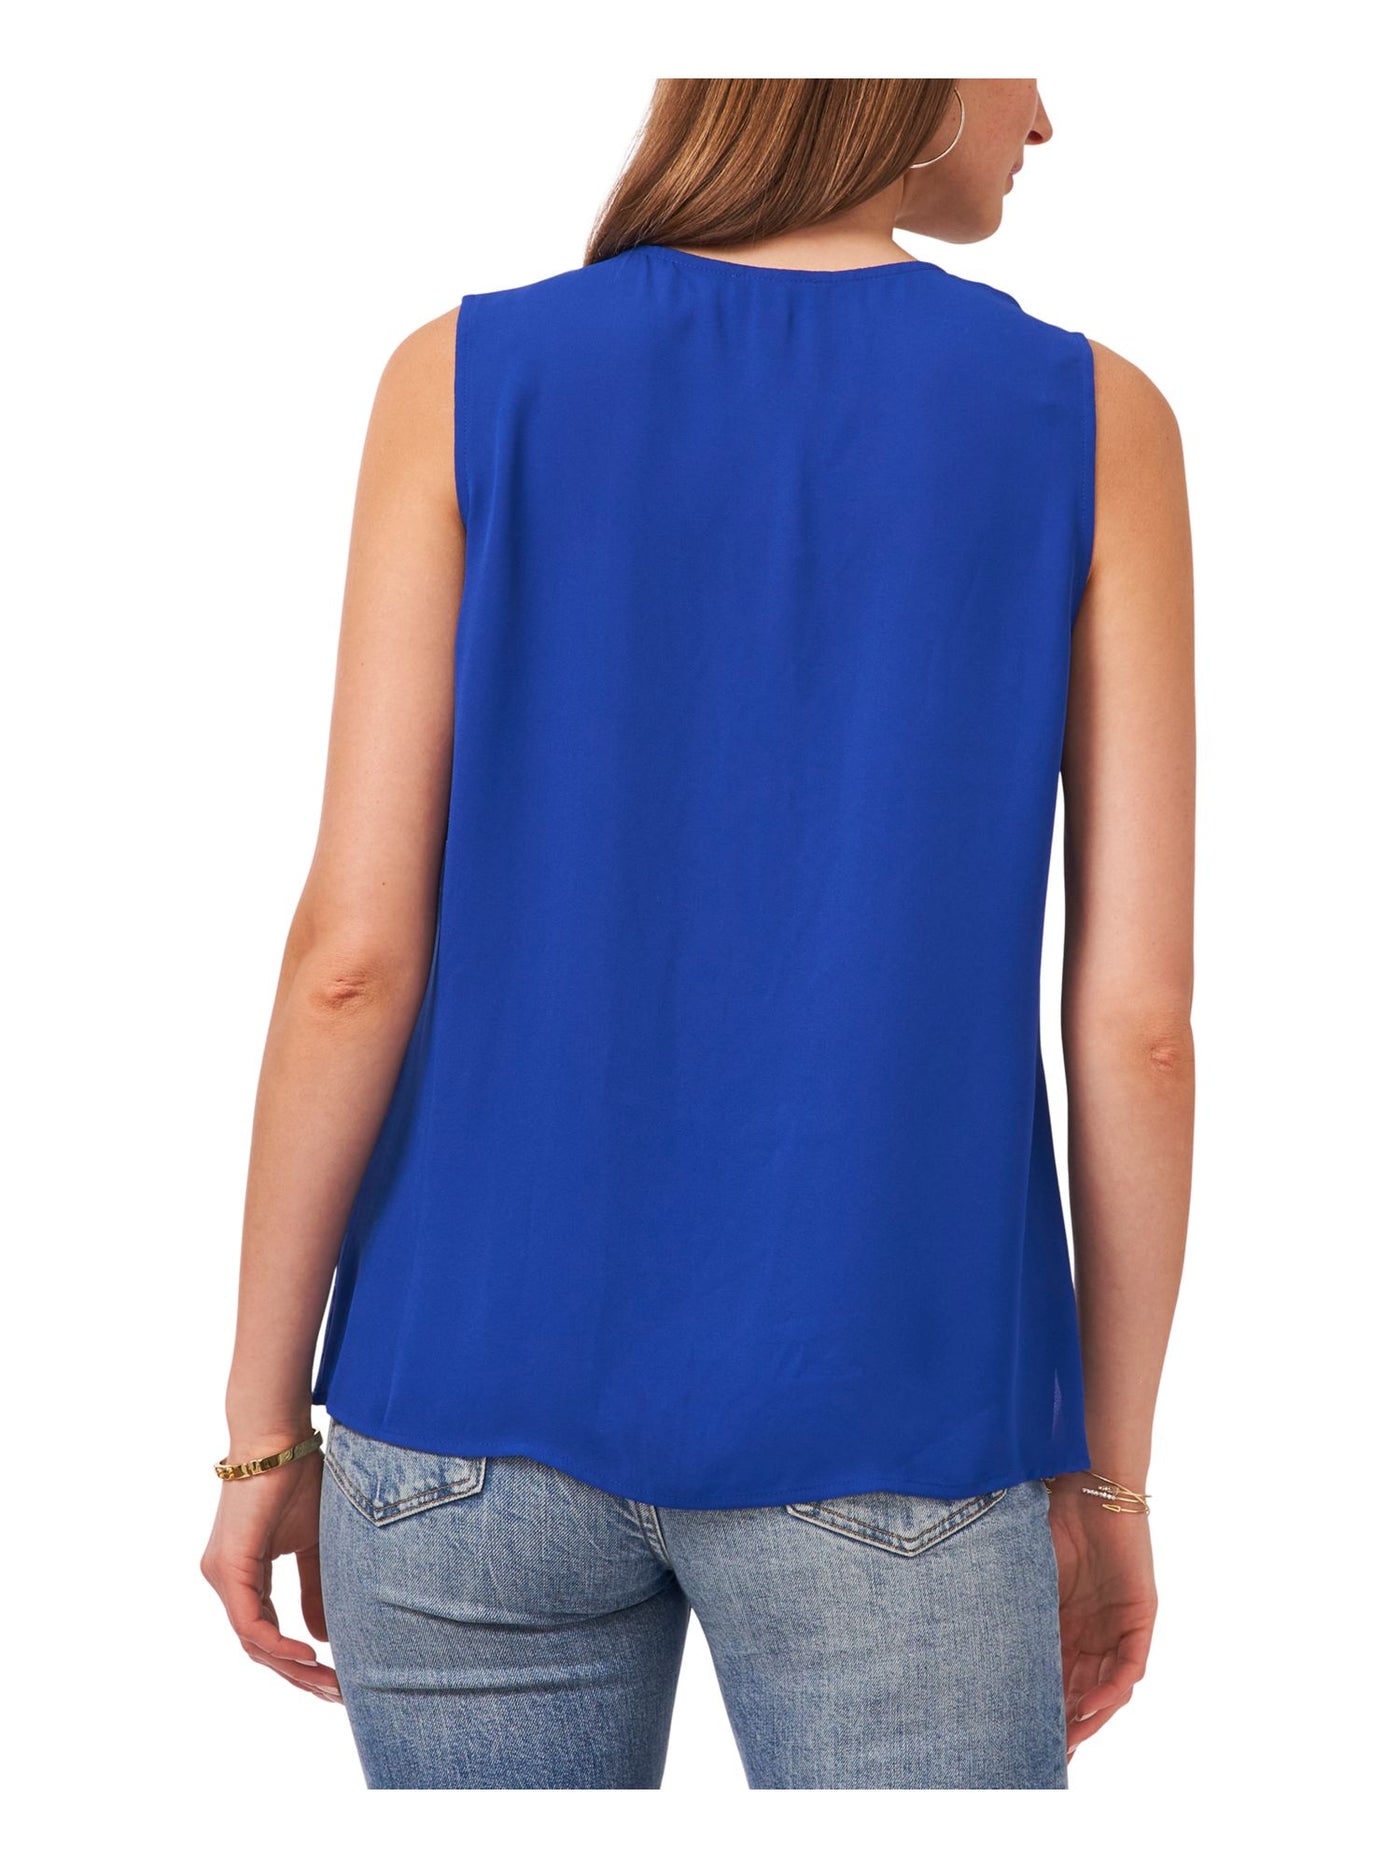 VINCE CAMUTO Womens Blue Ruffled Slitted Sheer Sleeveless V Neck Top XS